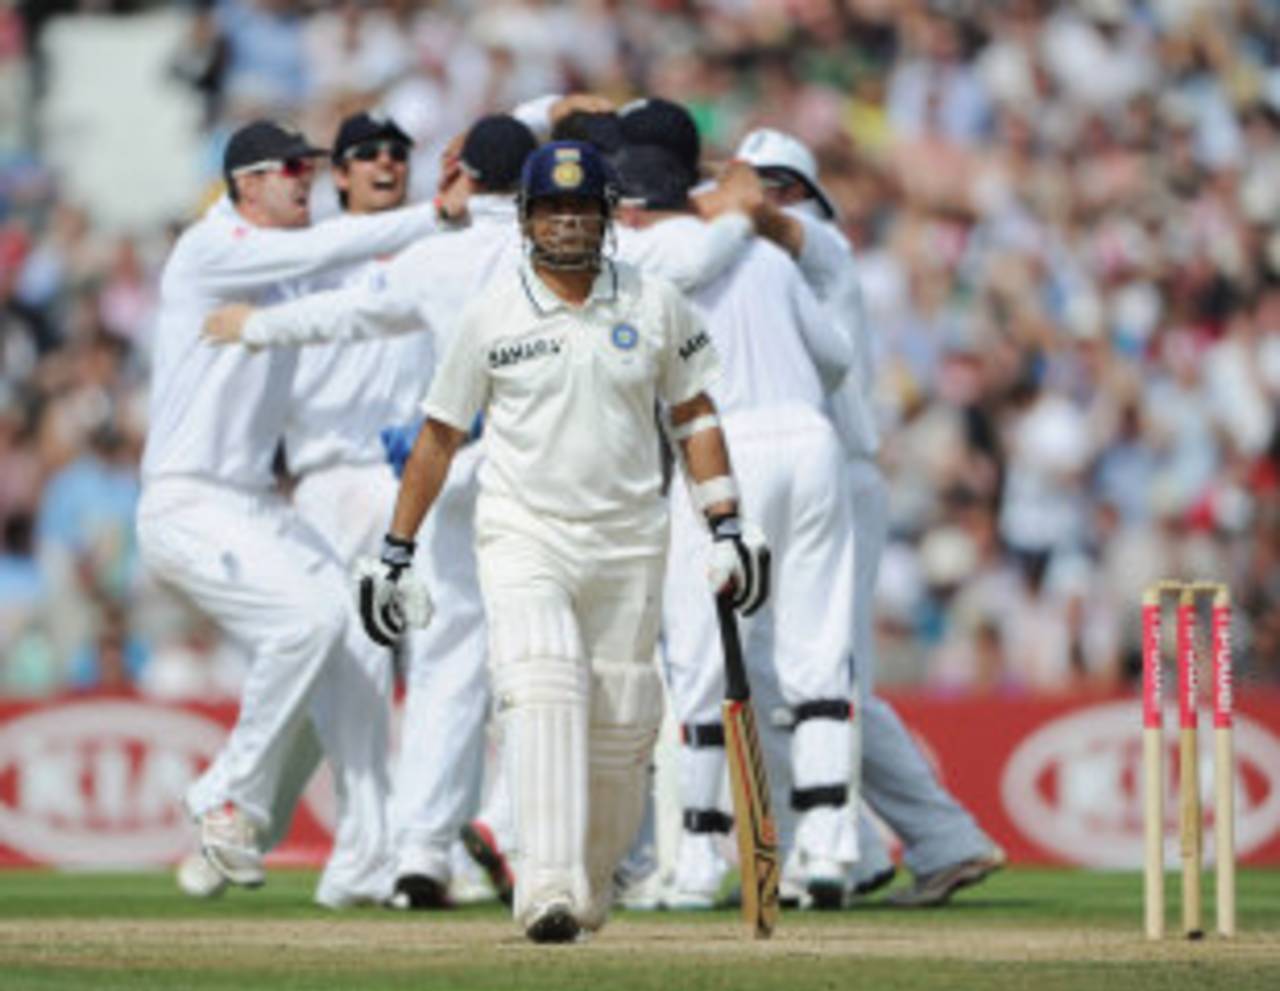 Sachin Tendulkar walks off after being trapped lbw for 91, England v India, 4th Test, The Oval, 5th day, August 22, 2011